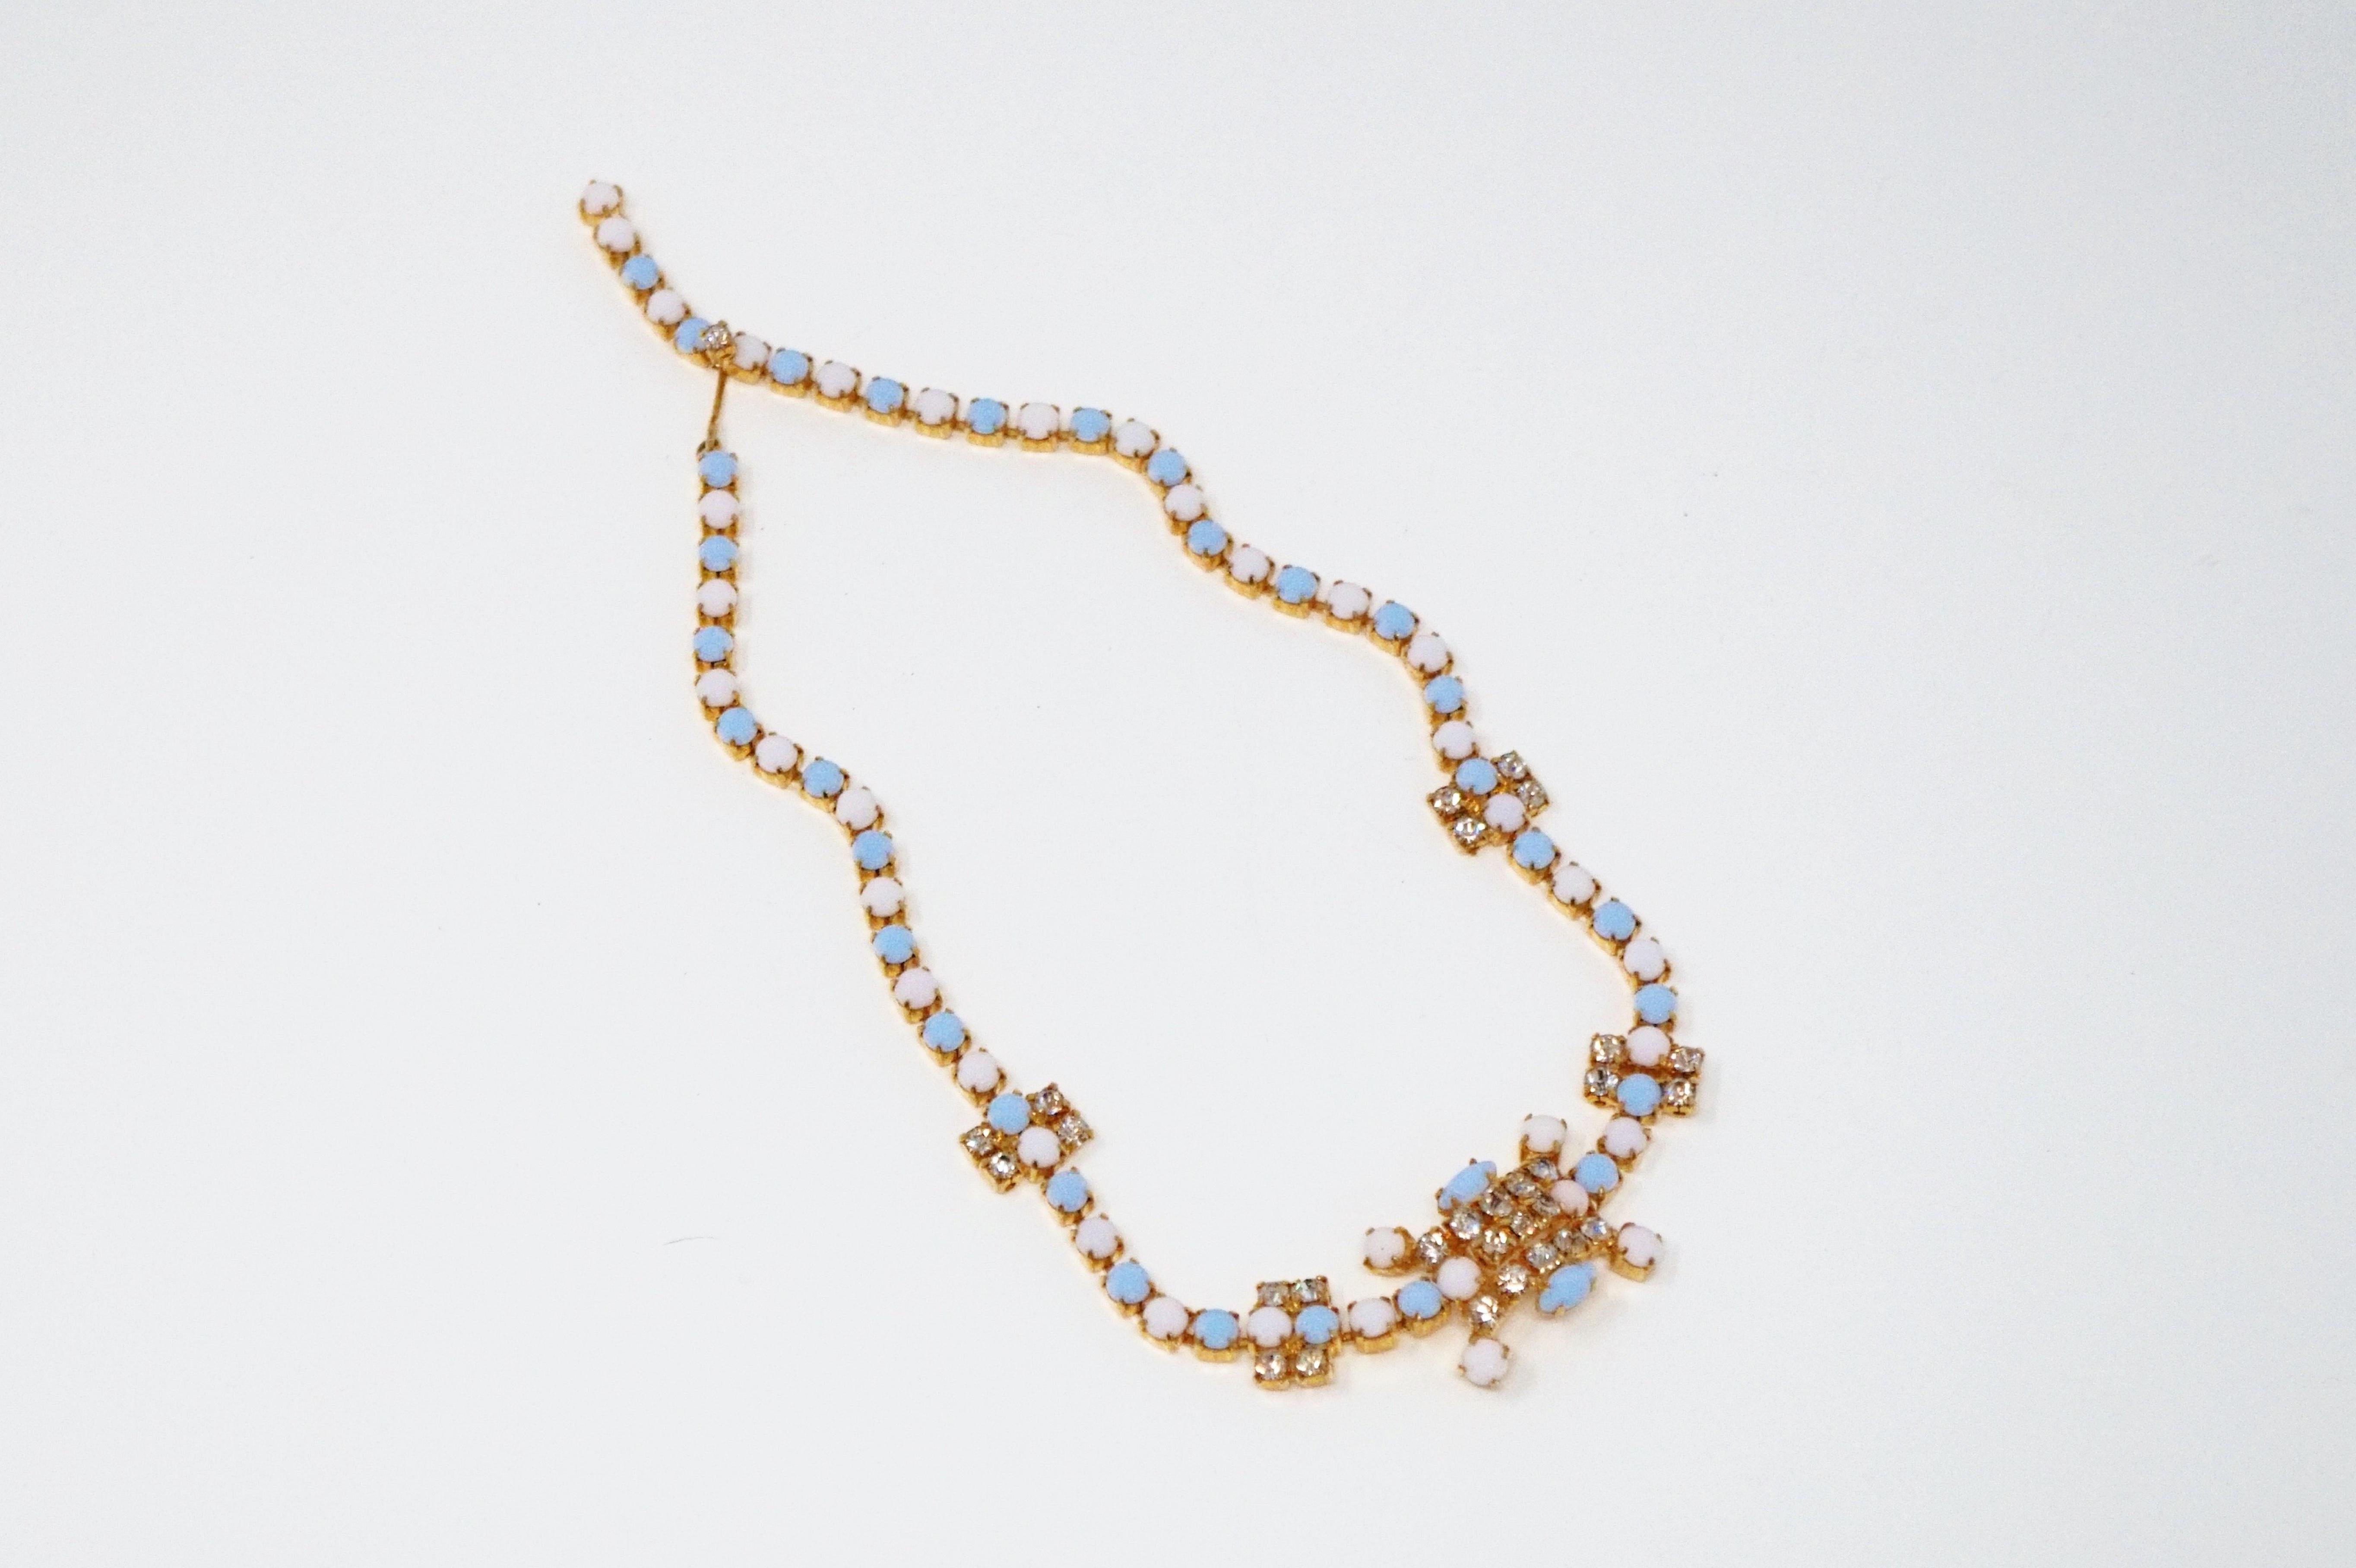 This beautiful vintage 1960s gold-plated periwinkle and white milk glass necklace with rhinestone accents is a must-have for vintage jewelry lovers! Feminine and glamorous, this piece makes a wonderful addition to your vintage jewelry